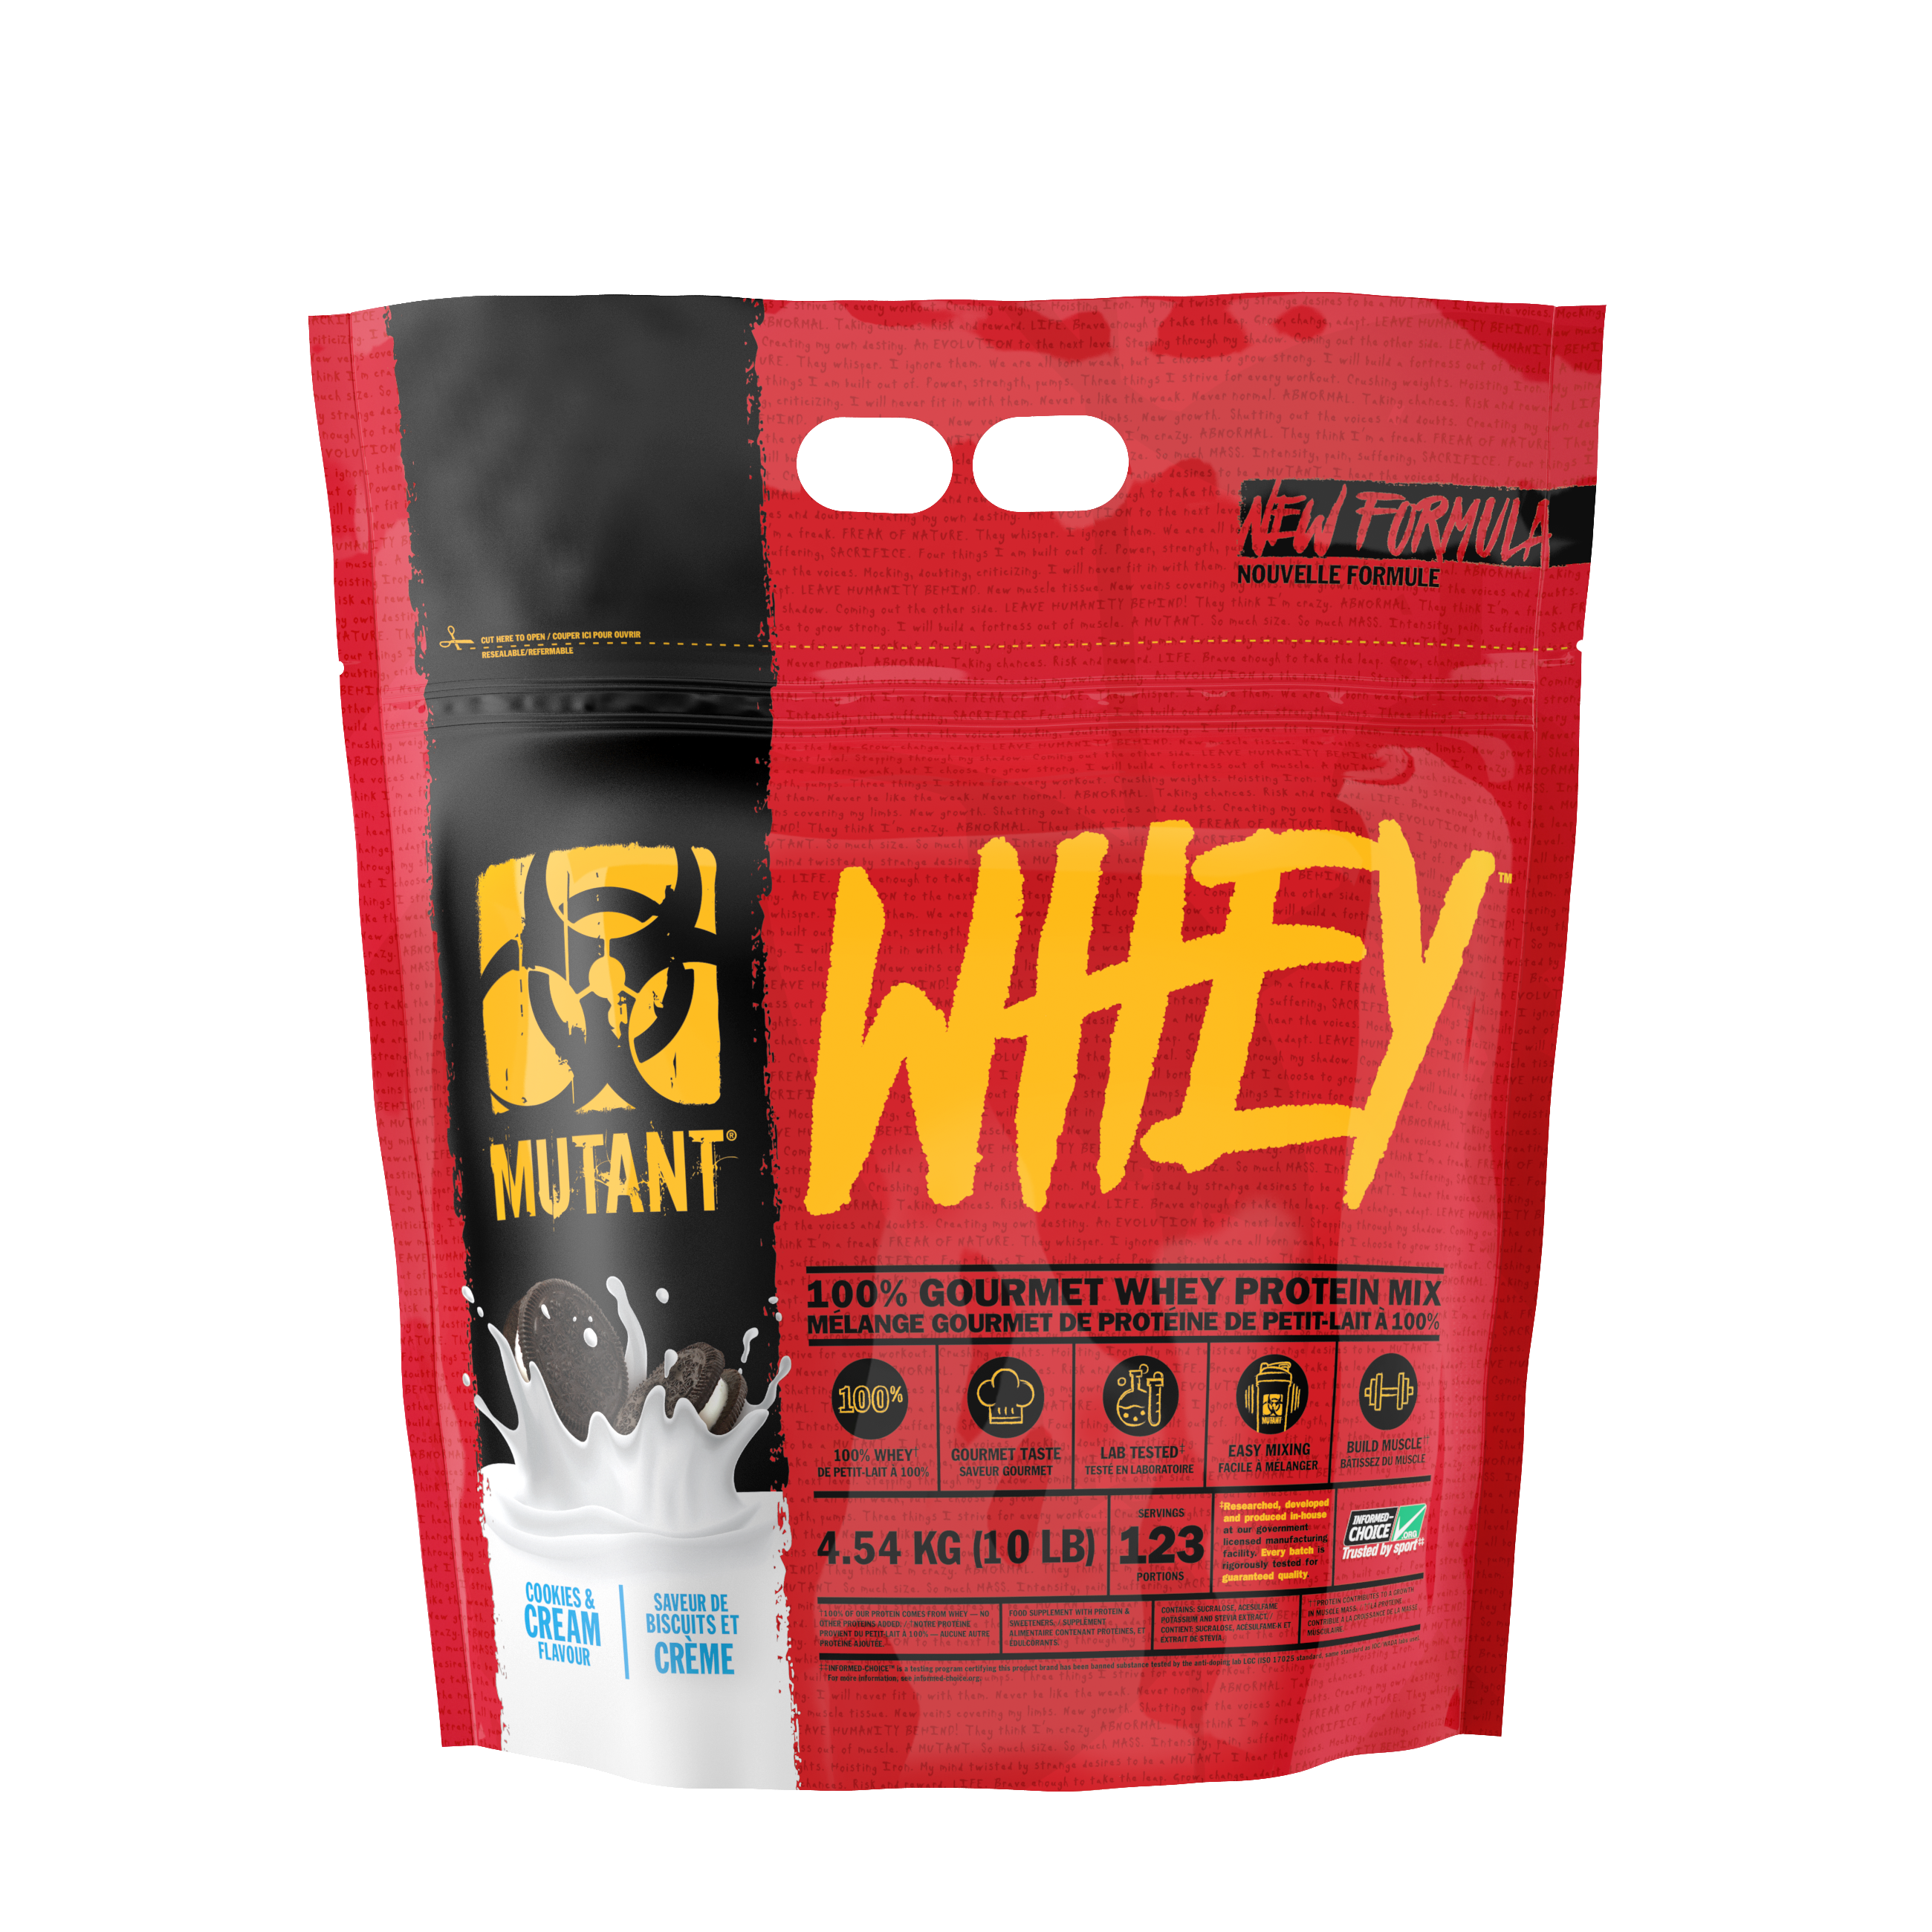 Mutant Whey (10 lbs) Whey Protein Cookies and Cream Mutant